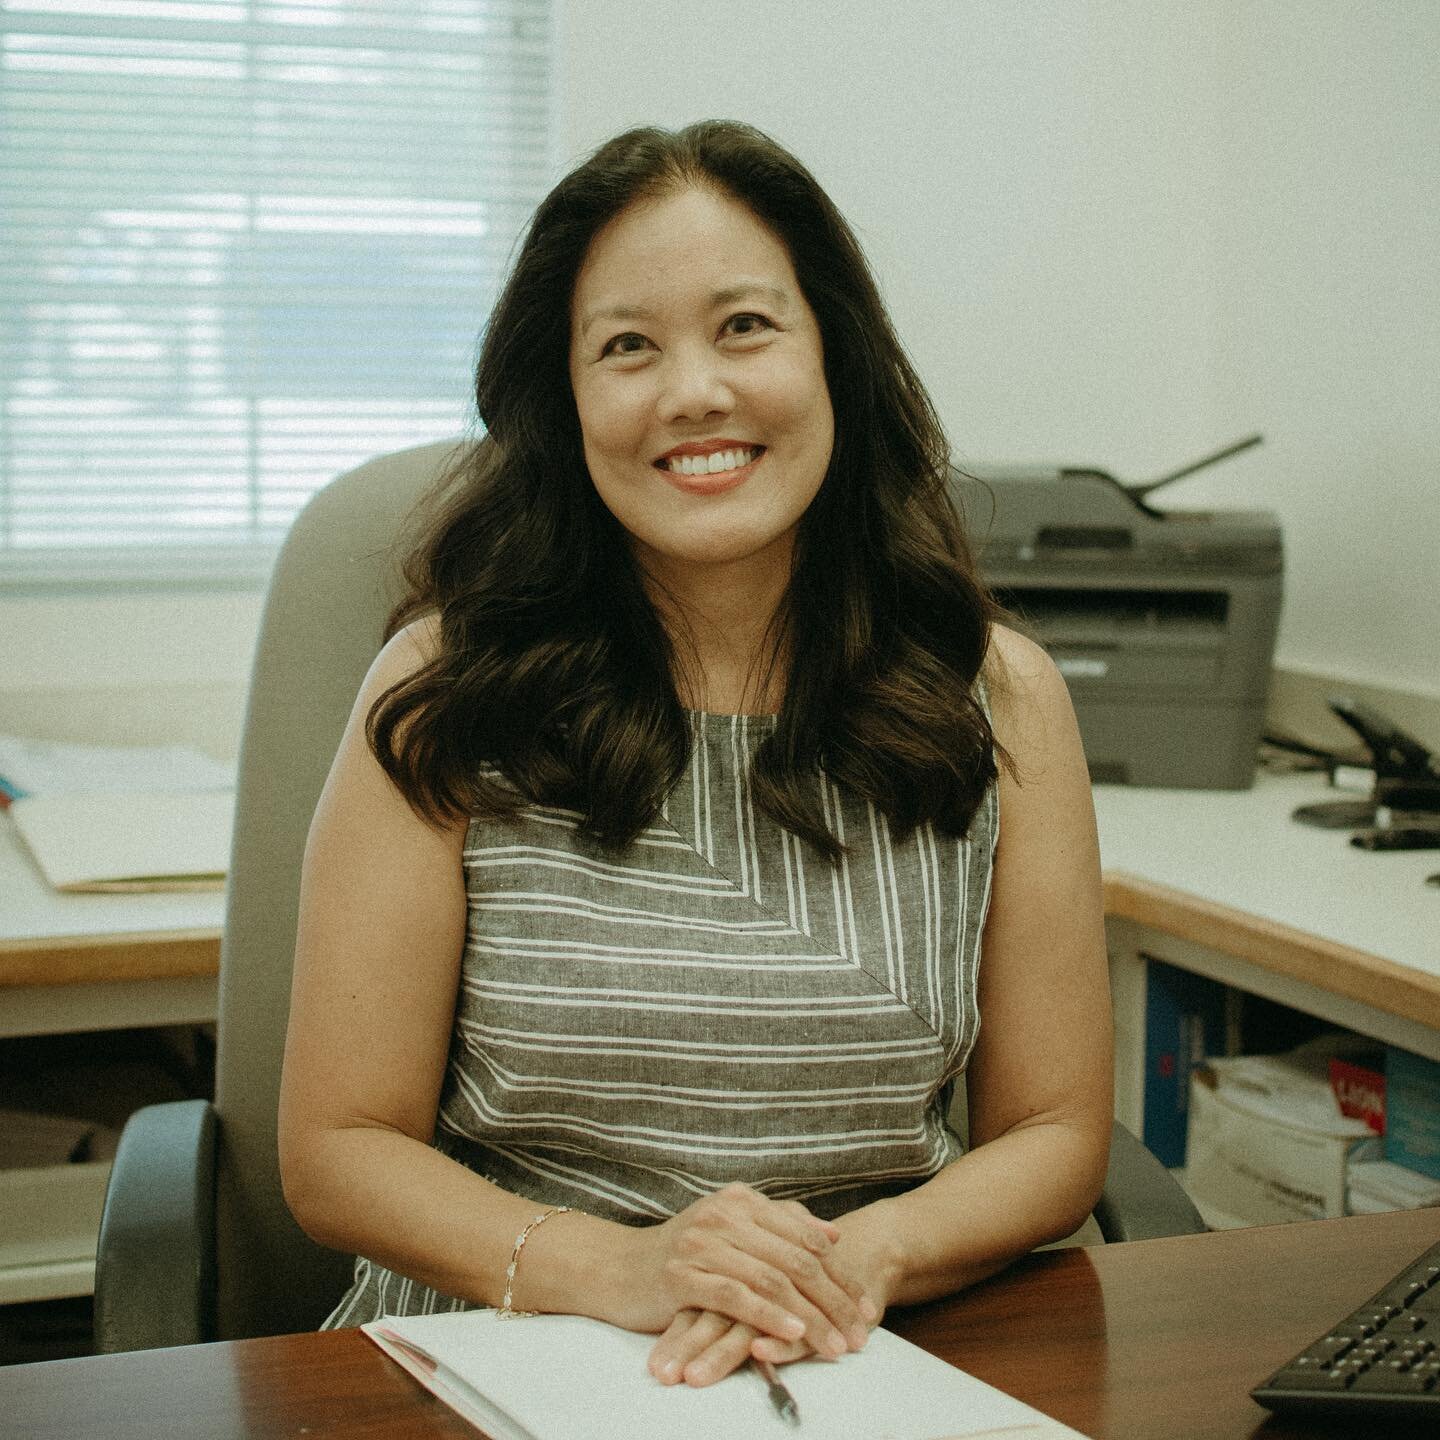 Meet Juli! A charming bookworm with a creative edge, Juli draws upon decades of experience in tax and accounting. Her warm smile and ability to connect with clients makes her a star to the team.💫
﻿
﻿Growing up in Honolulu, Oahu, Juli attended Kameha